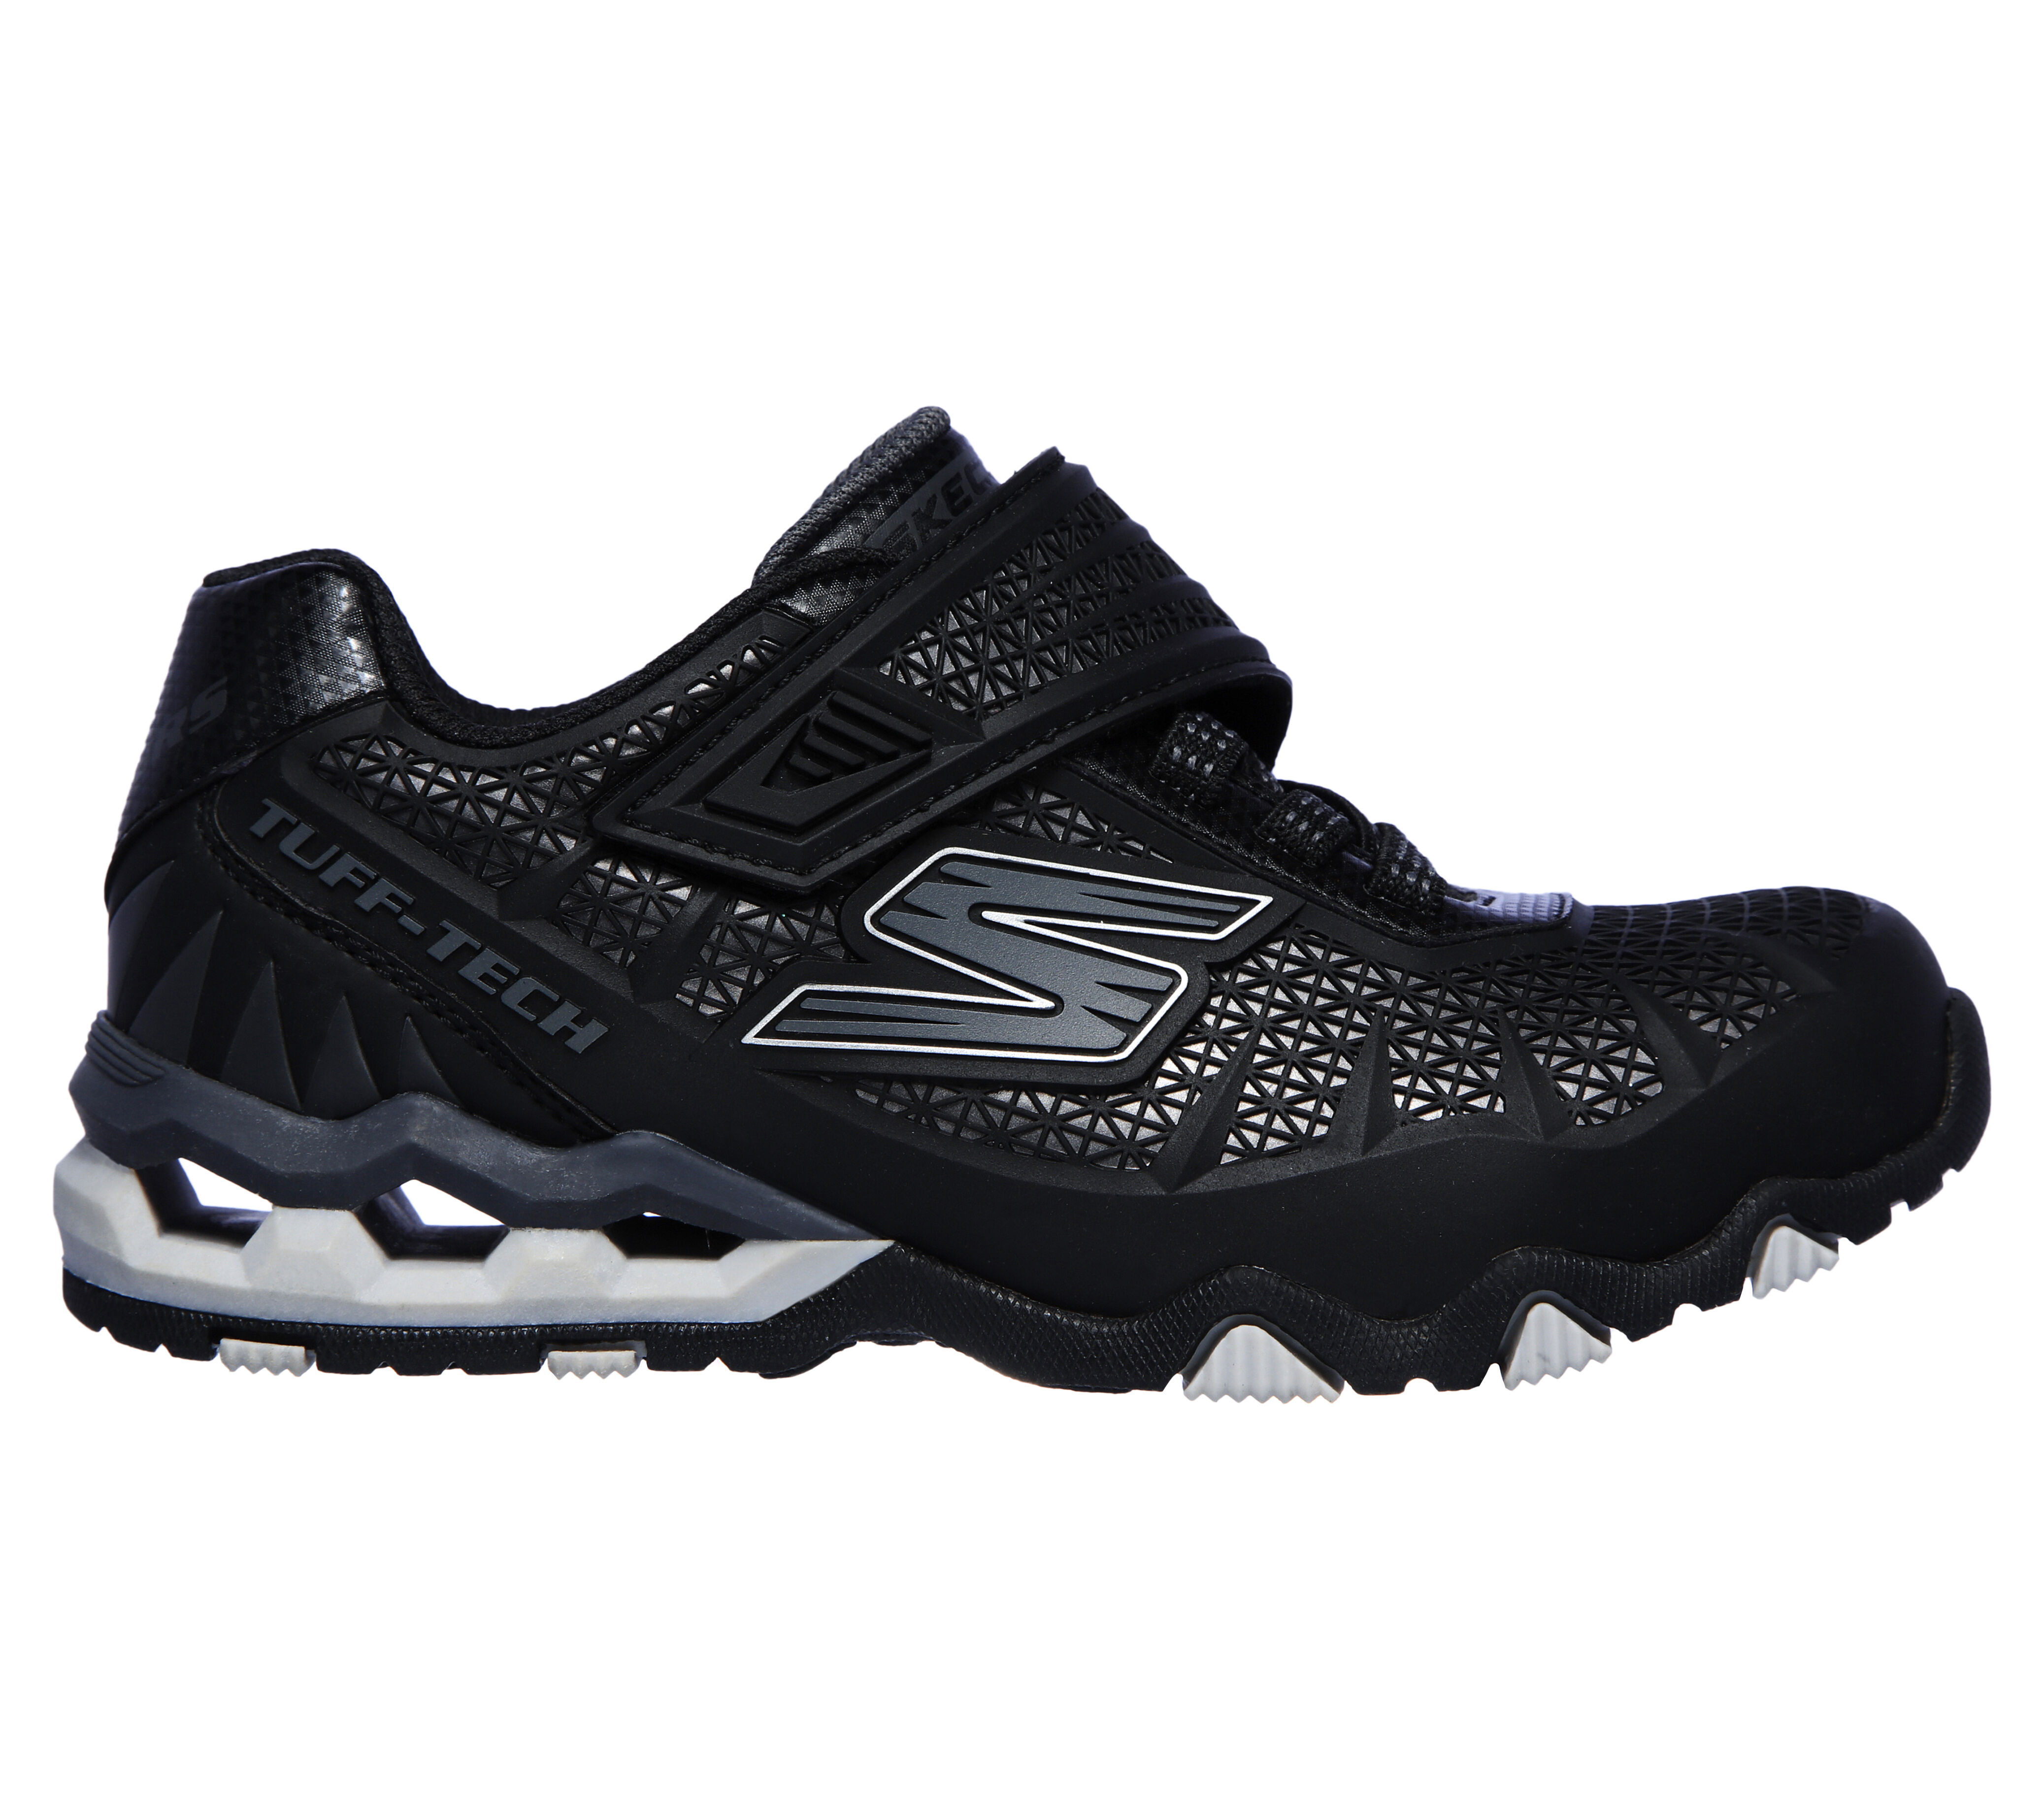 Shop the Hydro - Static | SKECHERS